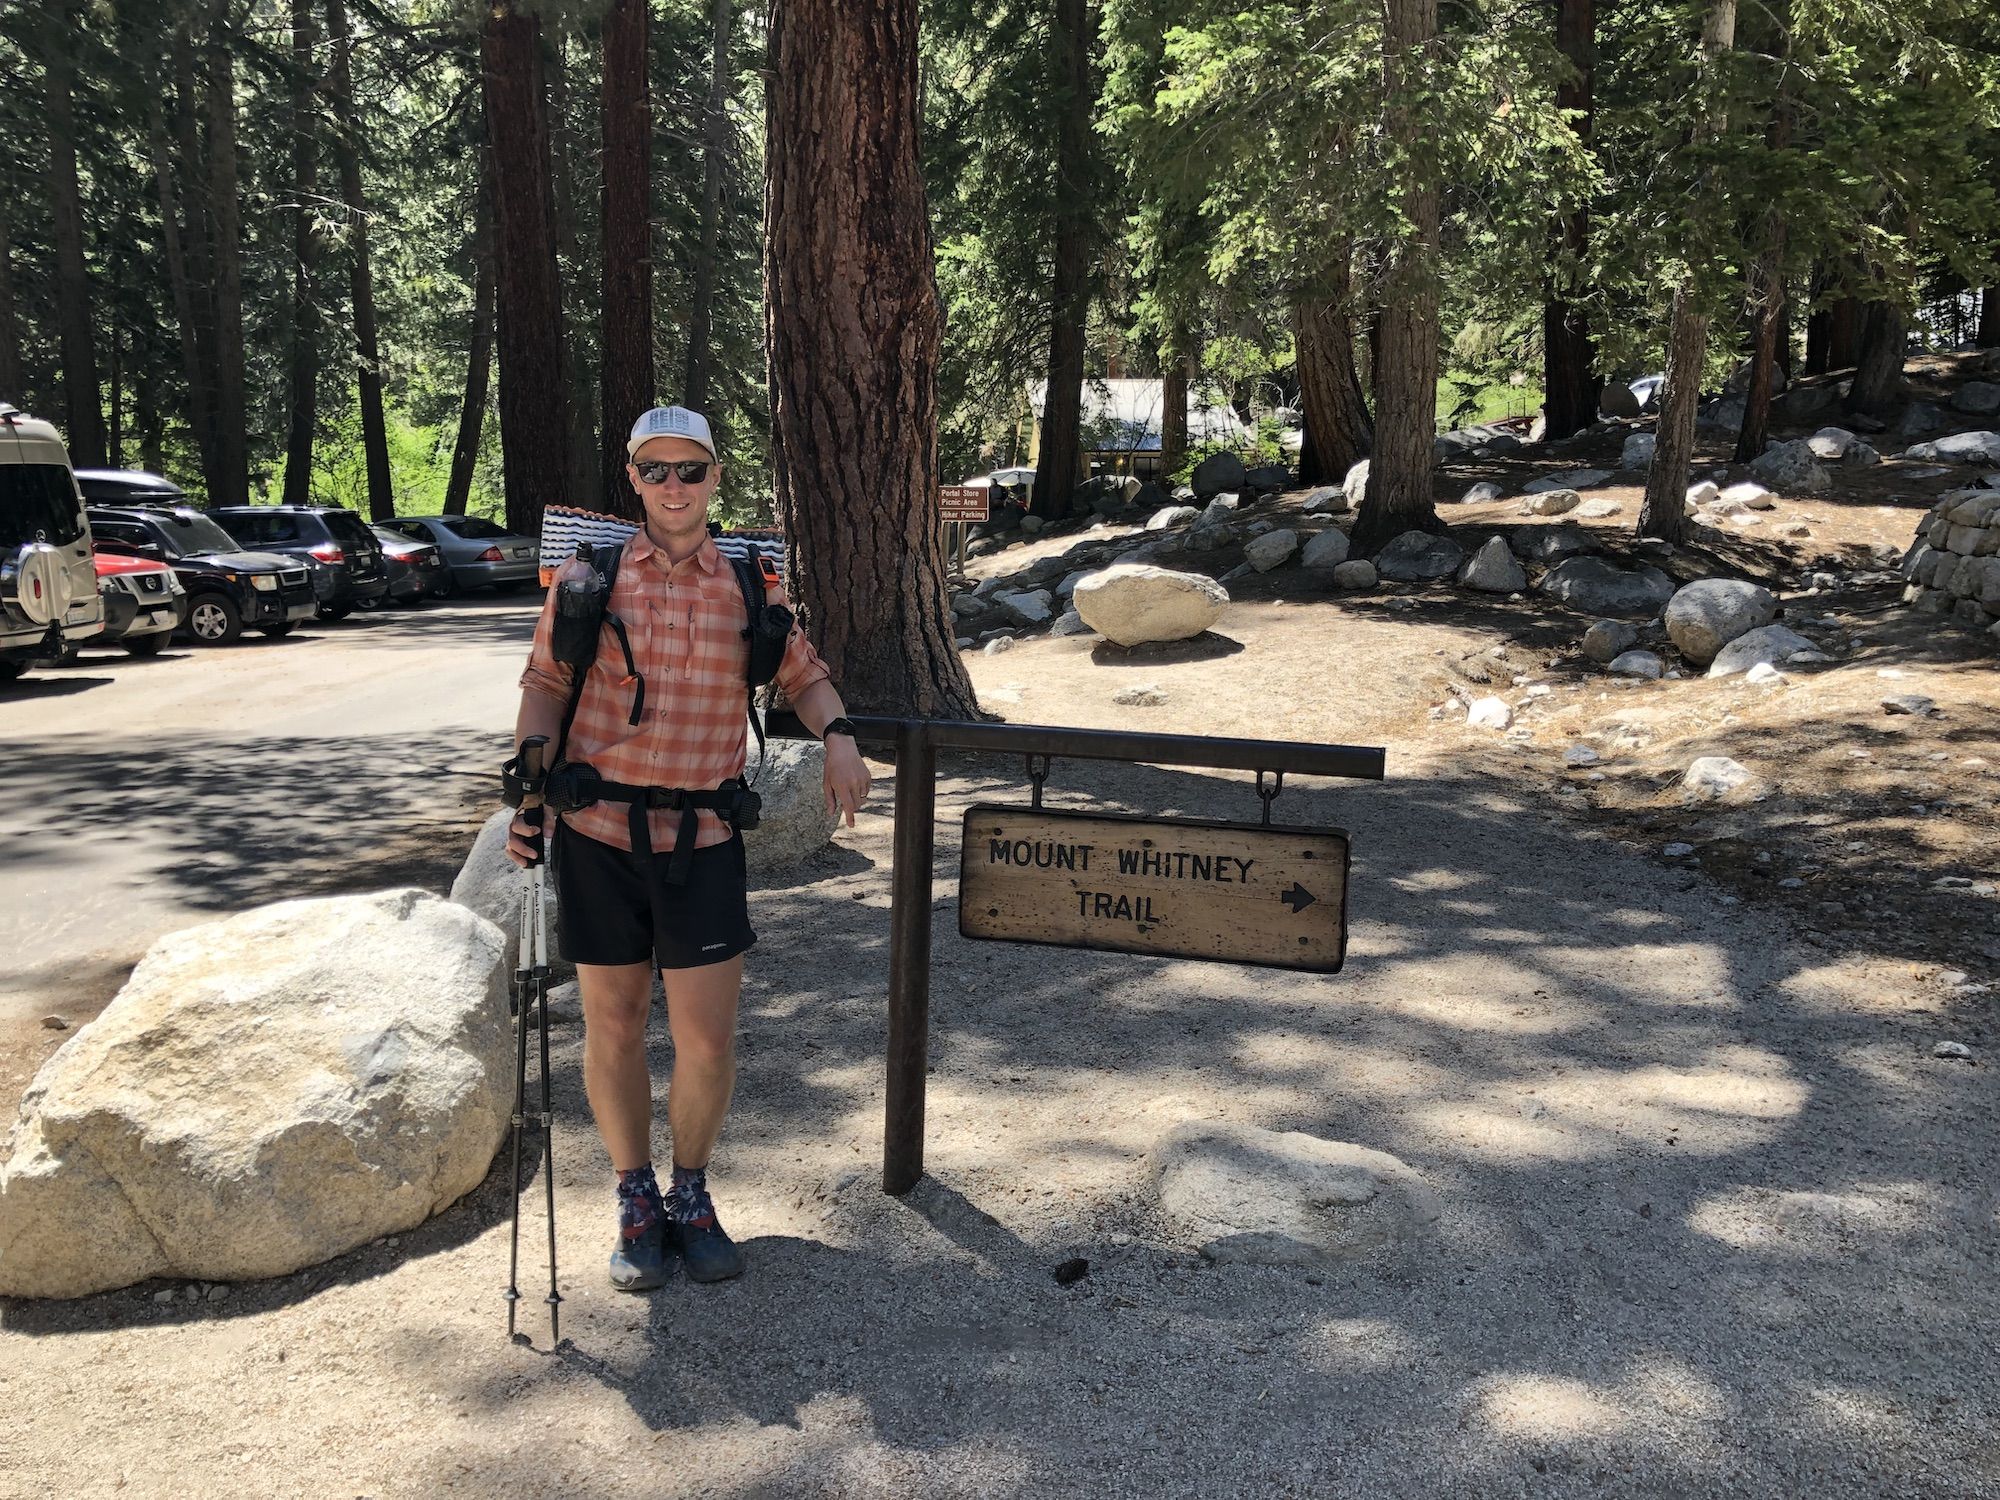 Me next to the Mt. Whitney trail sign at the end of the trail.